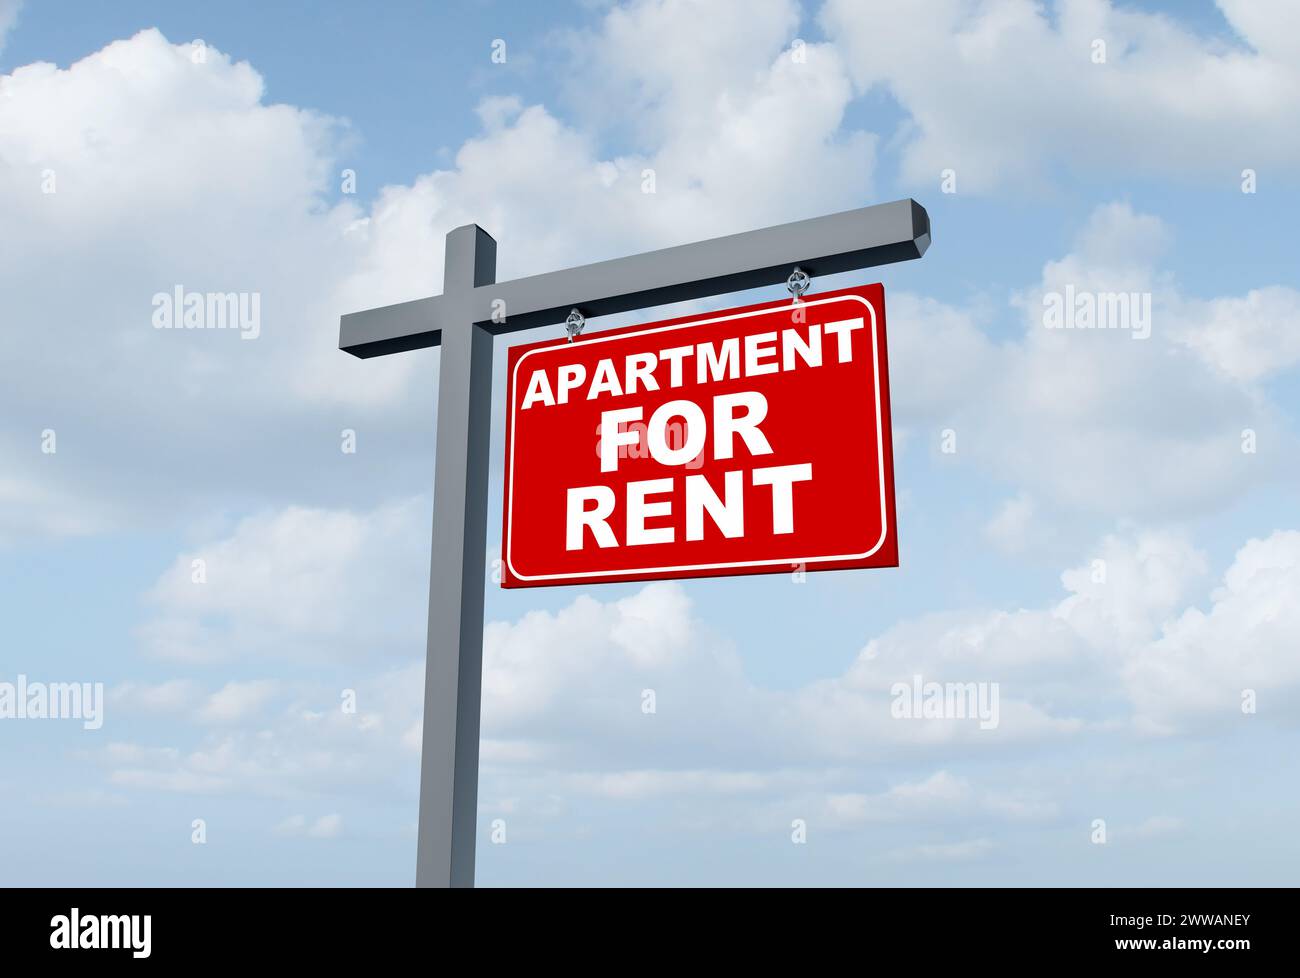 Apartment For Rent sign as Real Estate promotional billboard marketing the rental of apartments or rents through advertising with an agent or landlord Stock Photo